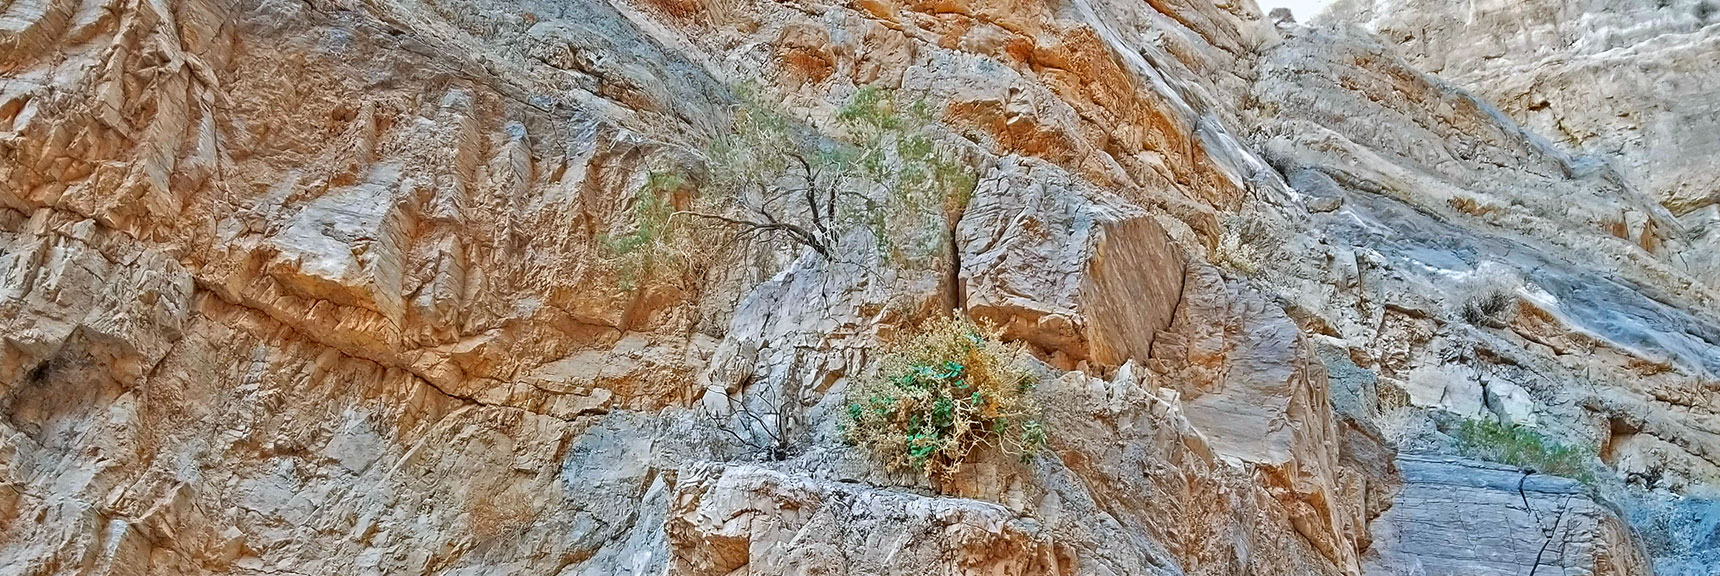 Plants Seemingly Growing Out of the Solid Rock Cliff Face | Fall Canyon | Death Valley National Park, California